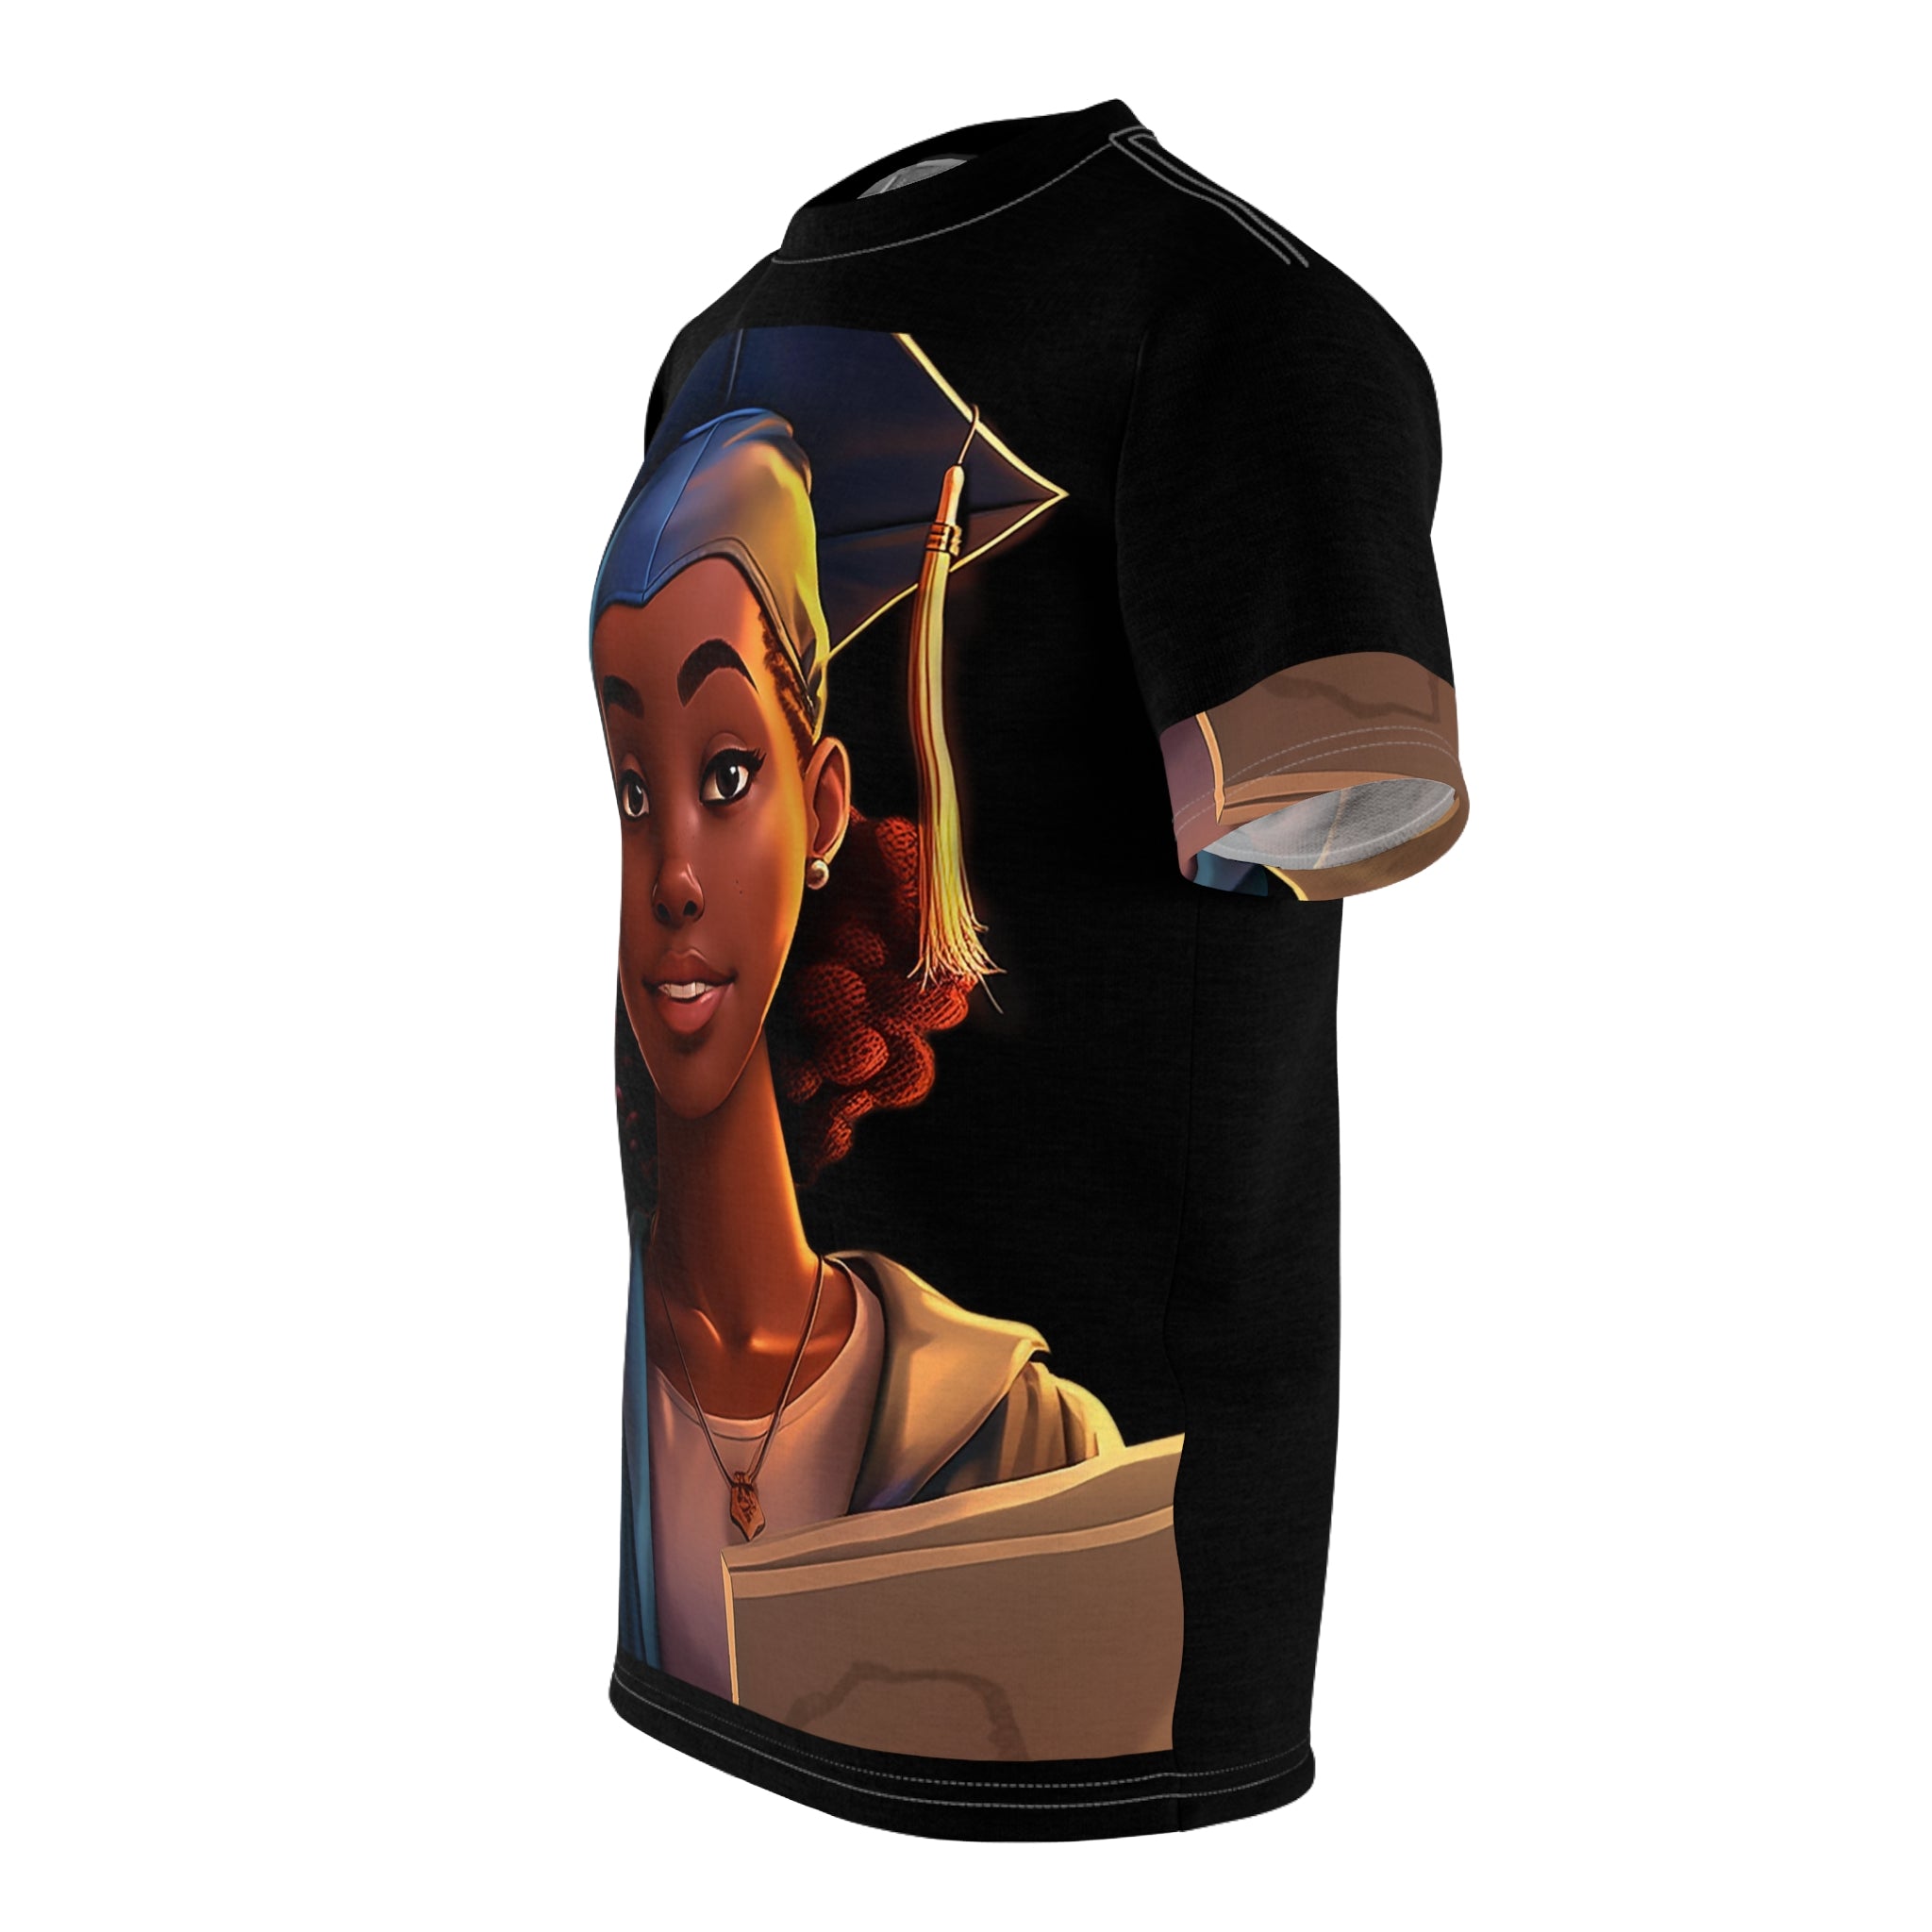 "THE GRADUATE" - African American Themed Unisex T-shirt